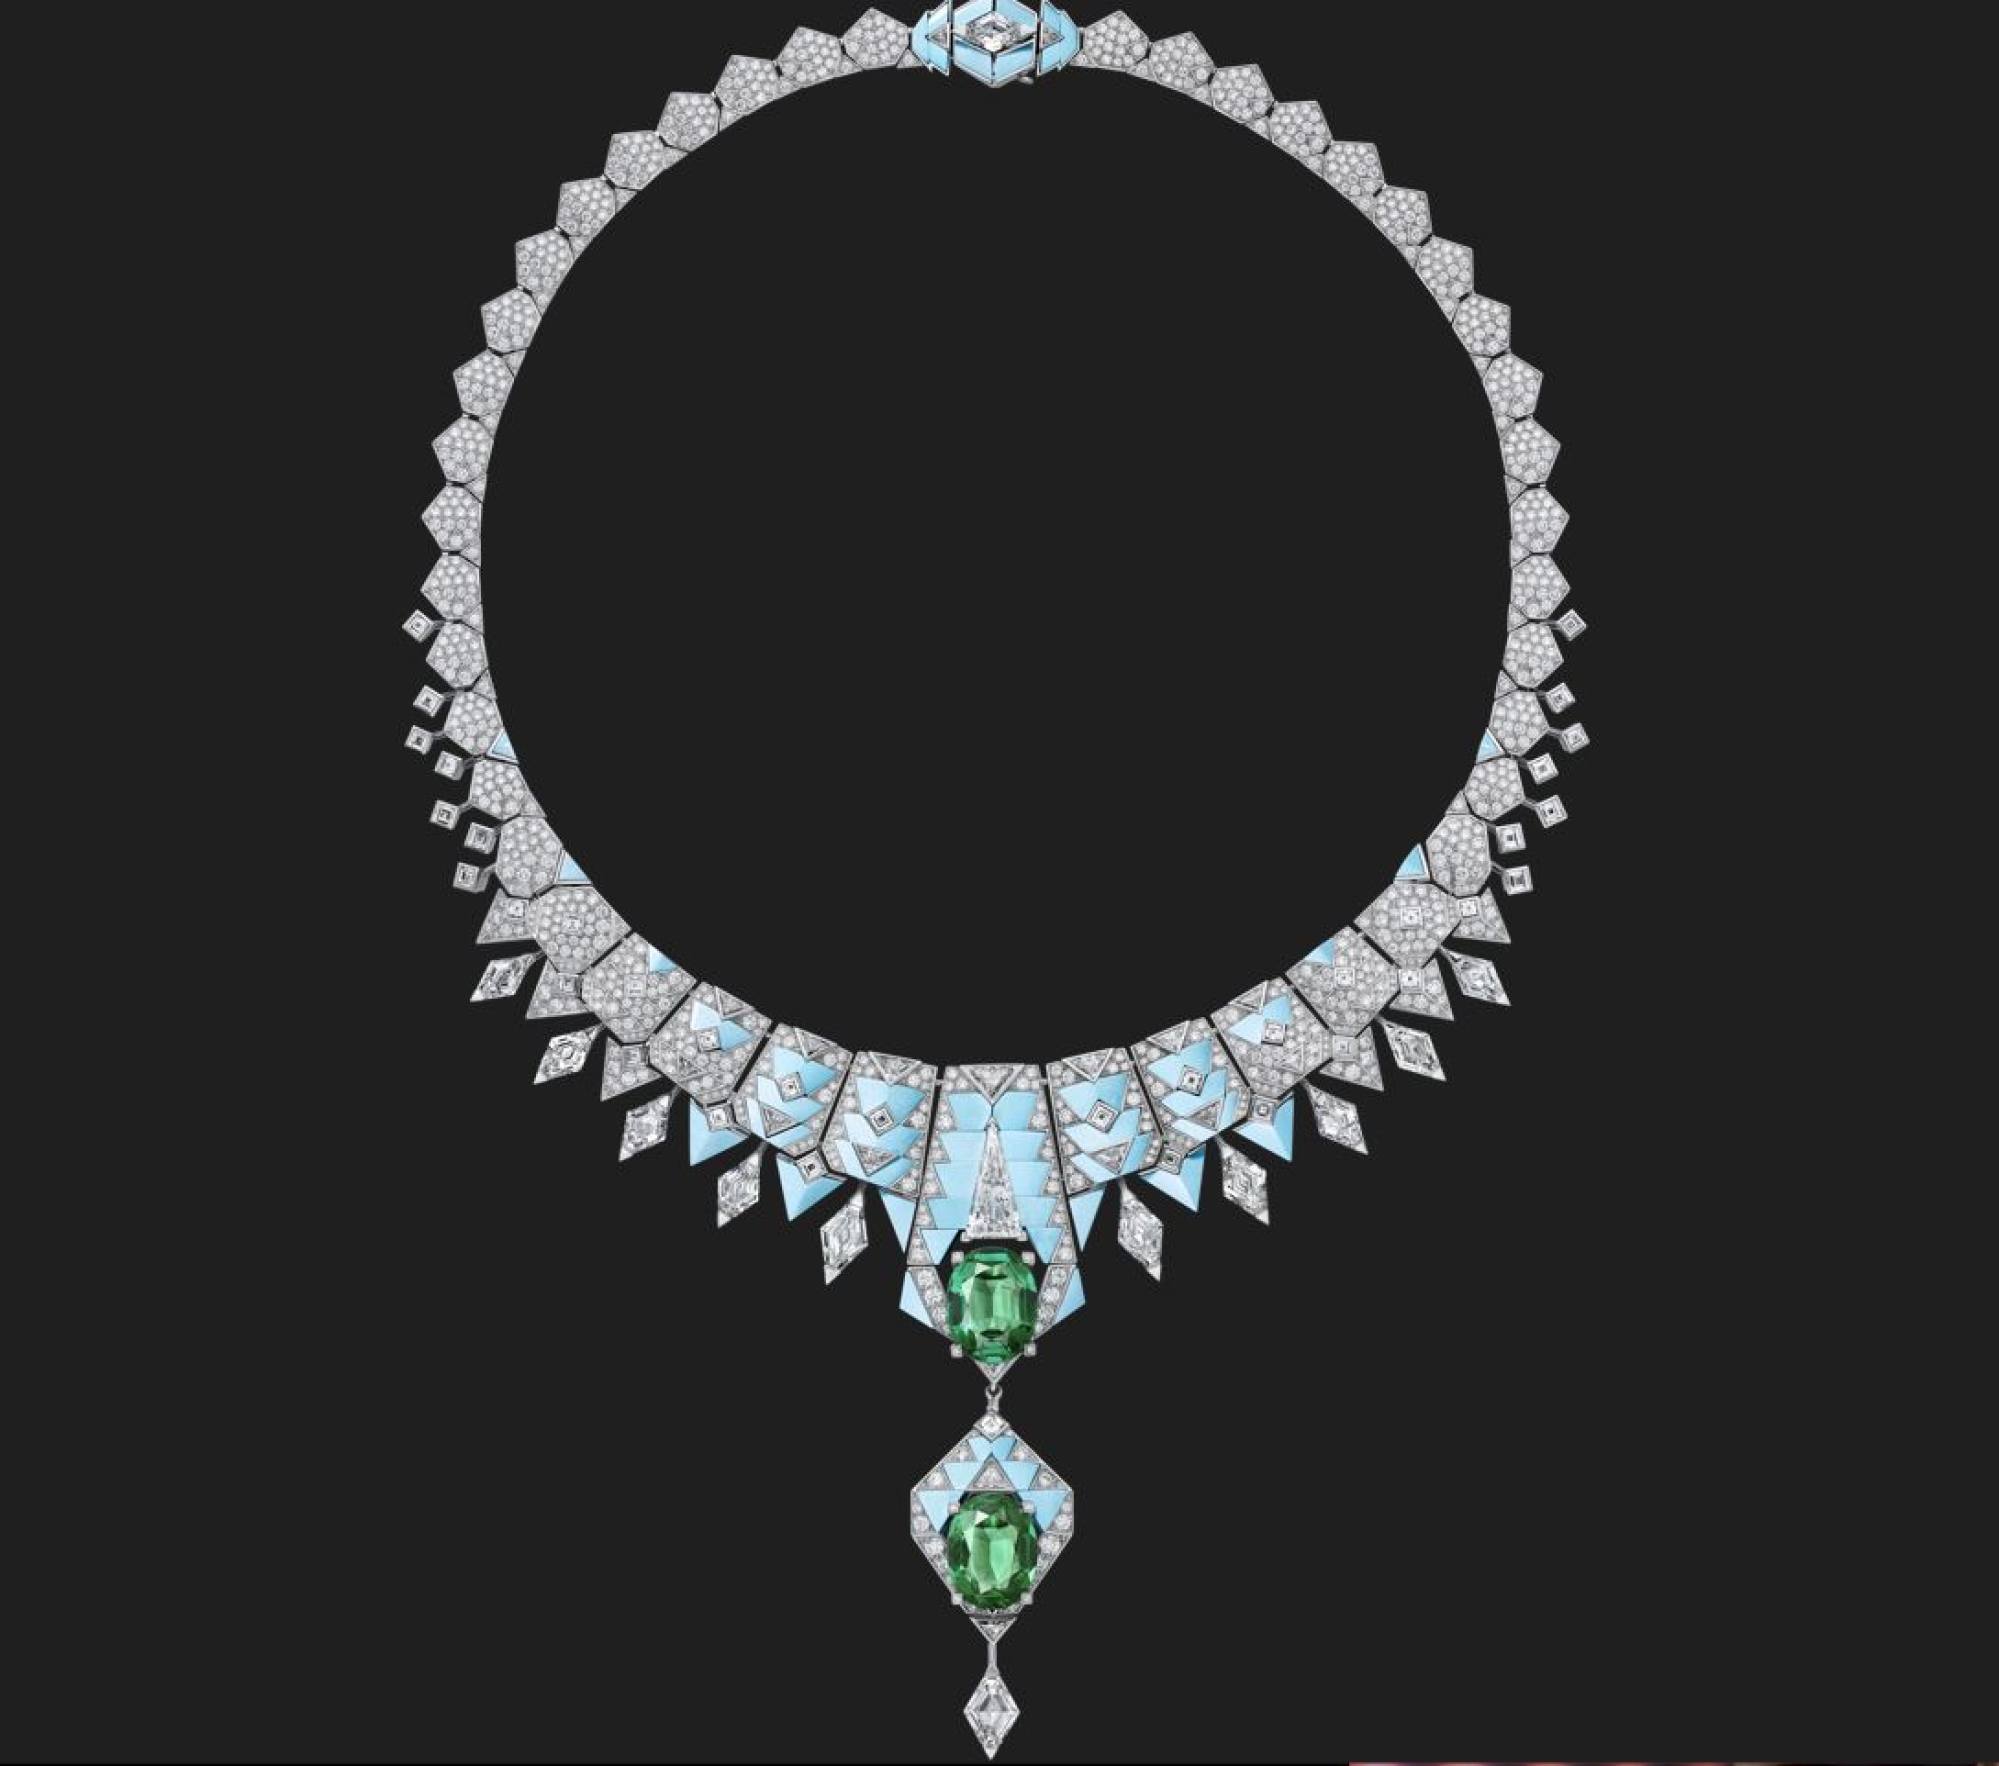 New Cartier high jewellery collection Le Voyage Recommencé